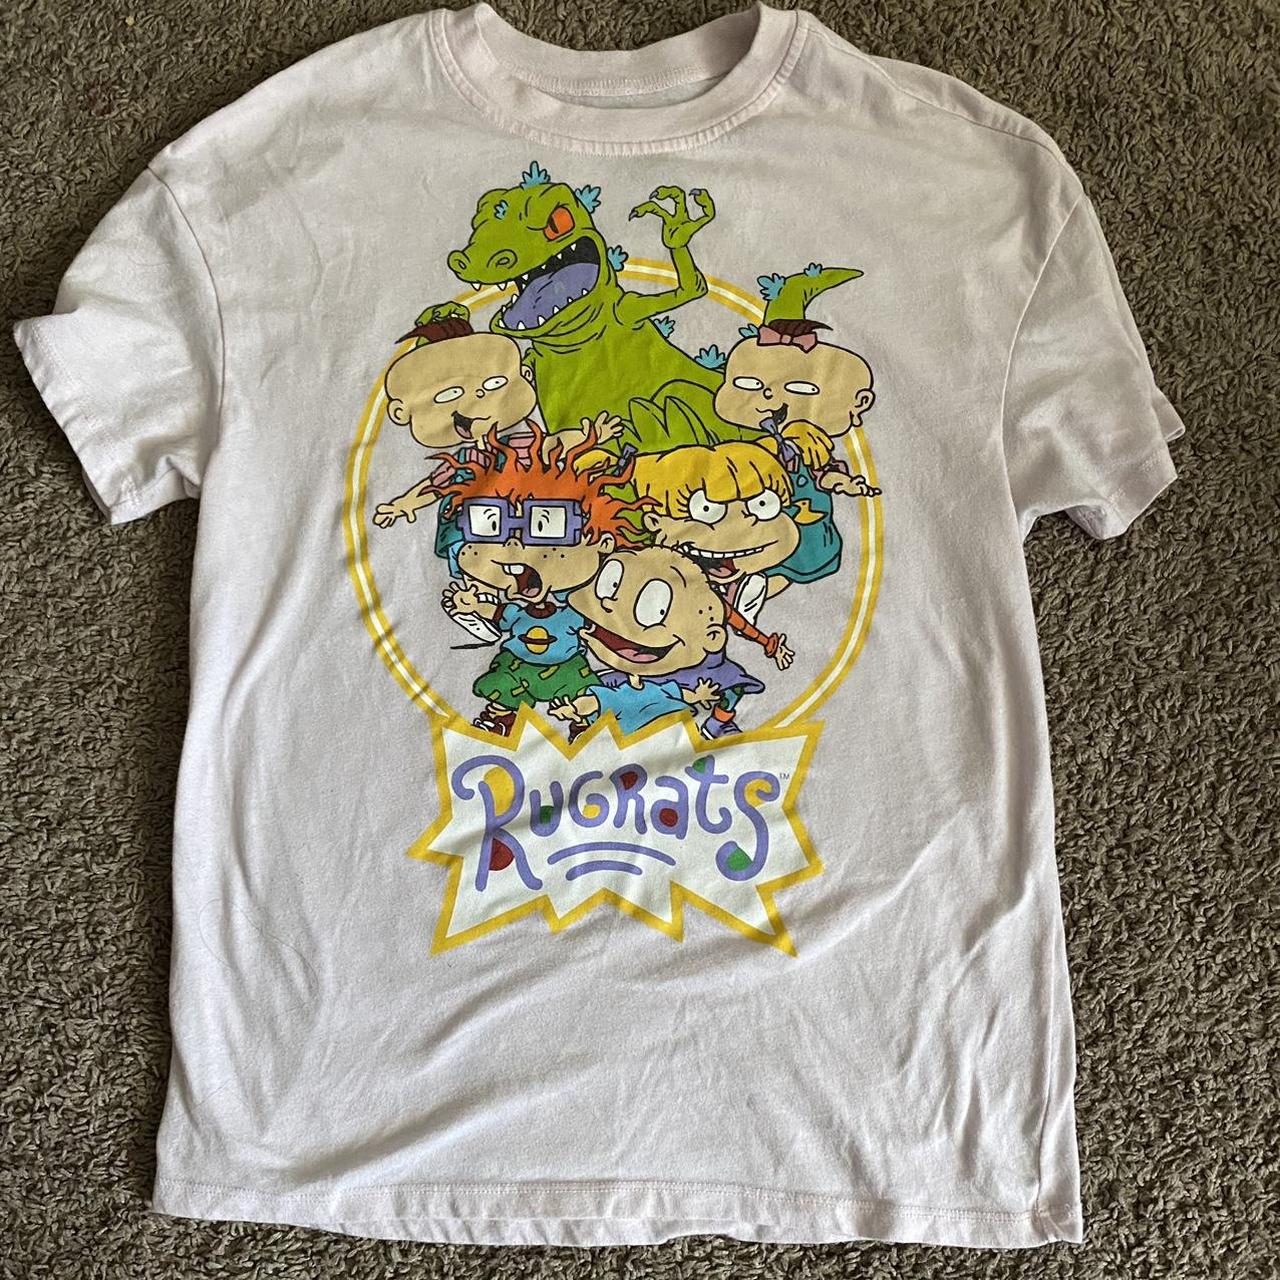 RugRats baby pink t-shirt 🍼 lmk for the... - Depop